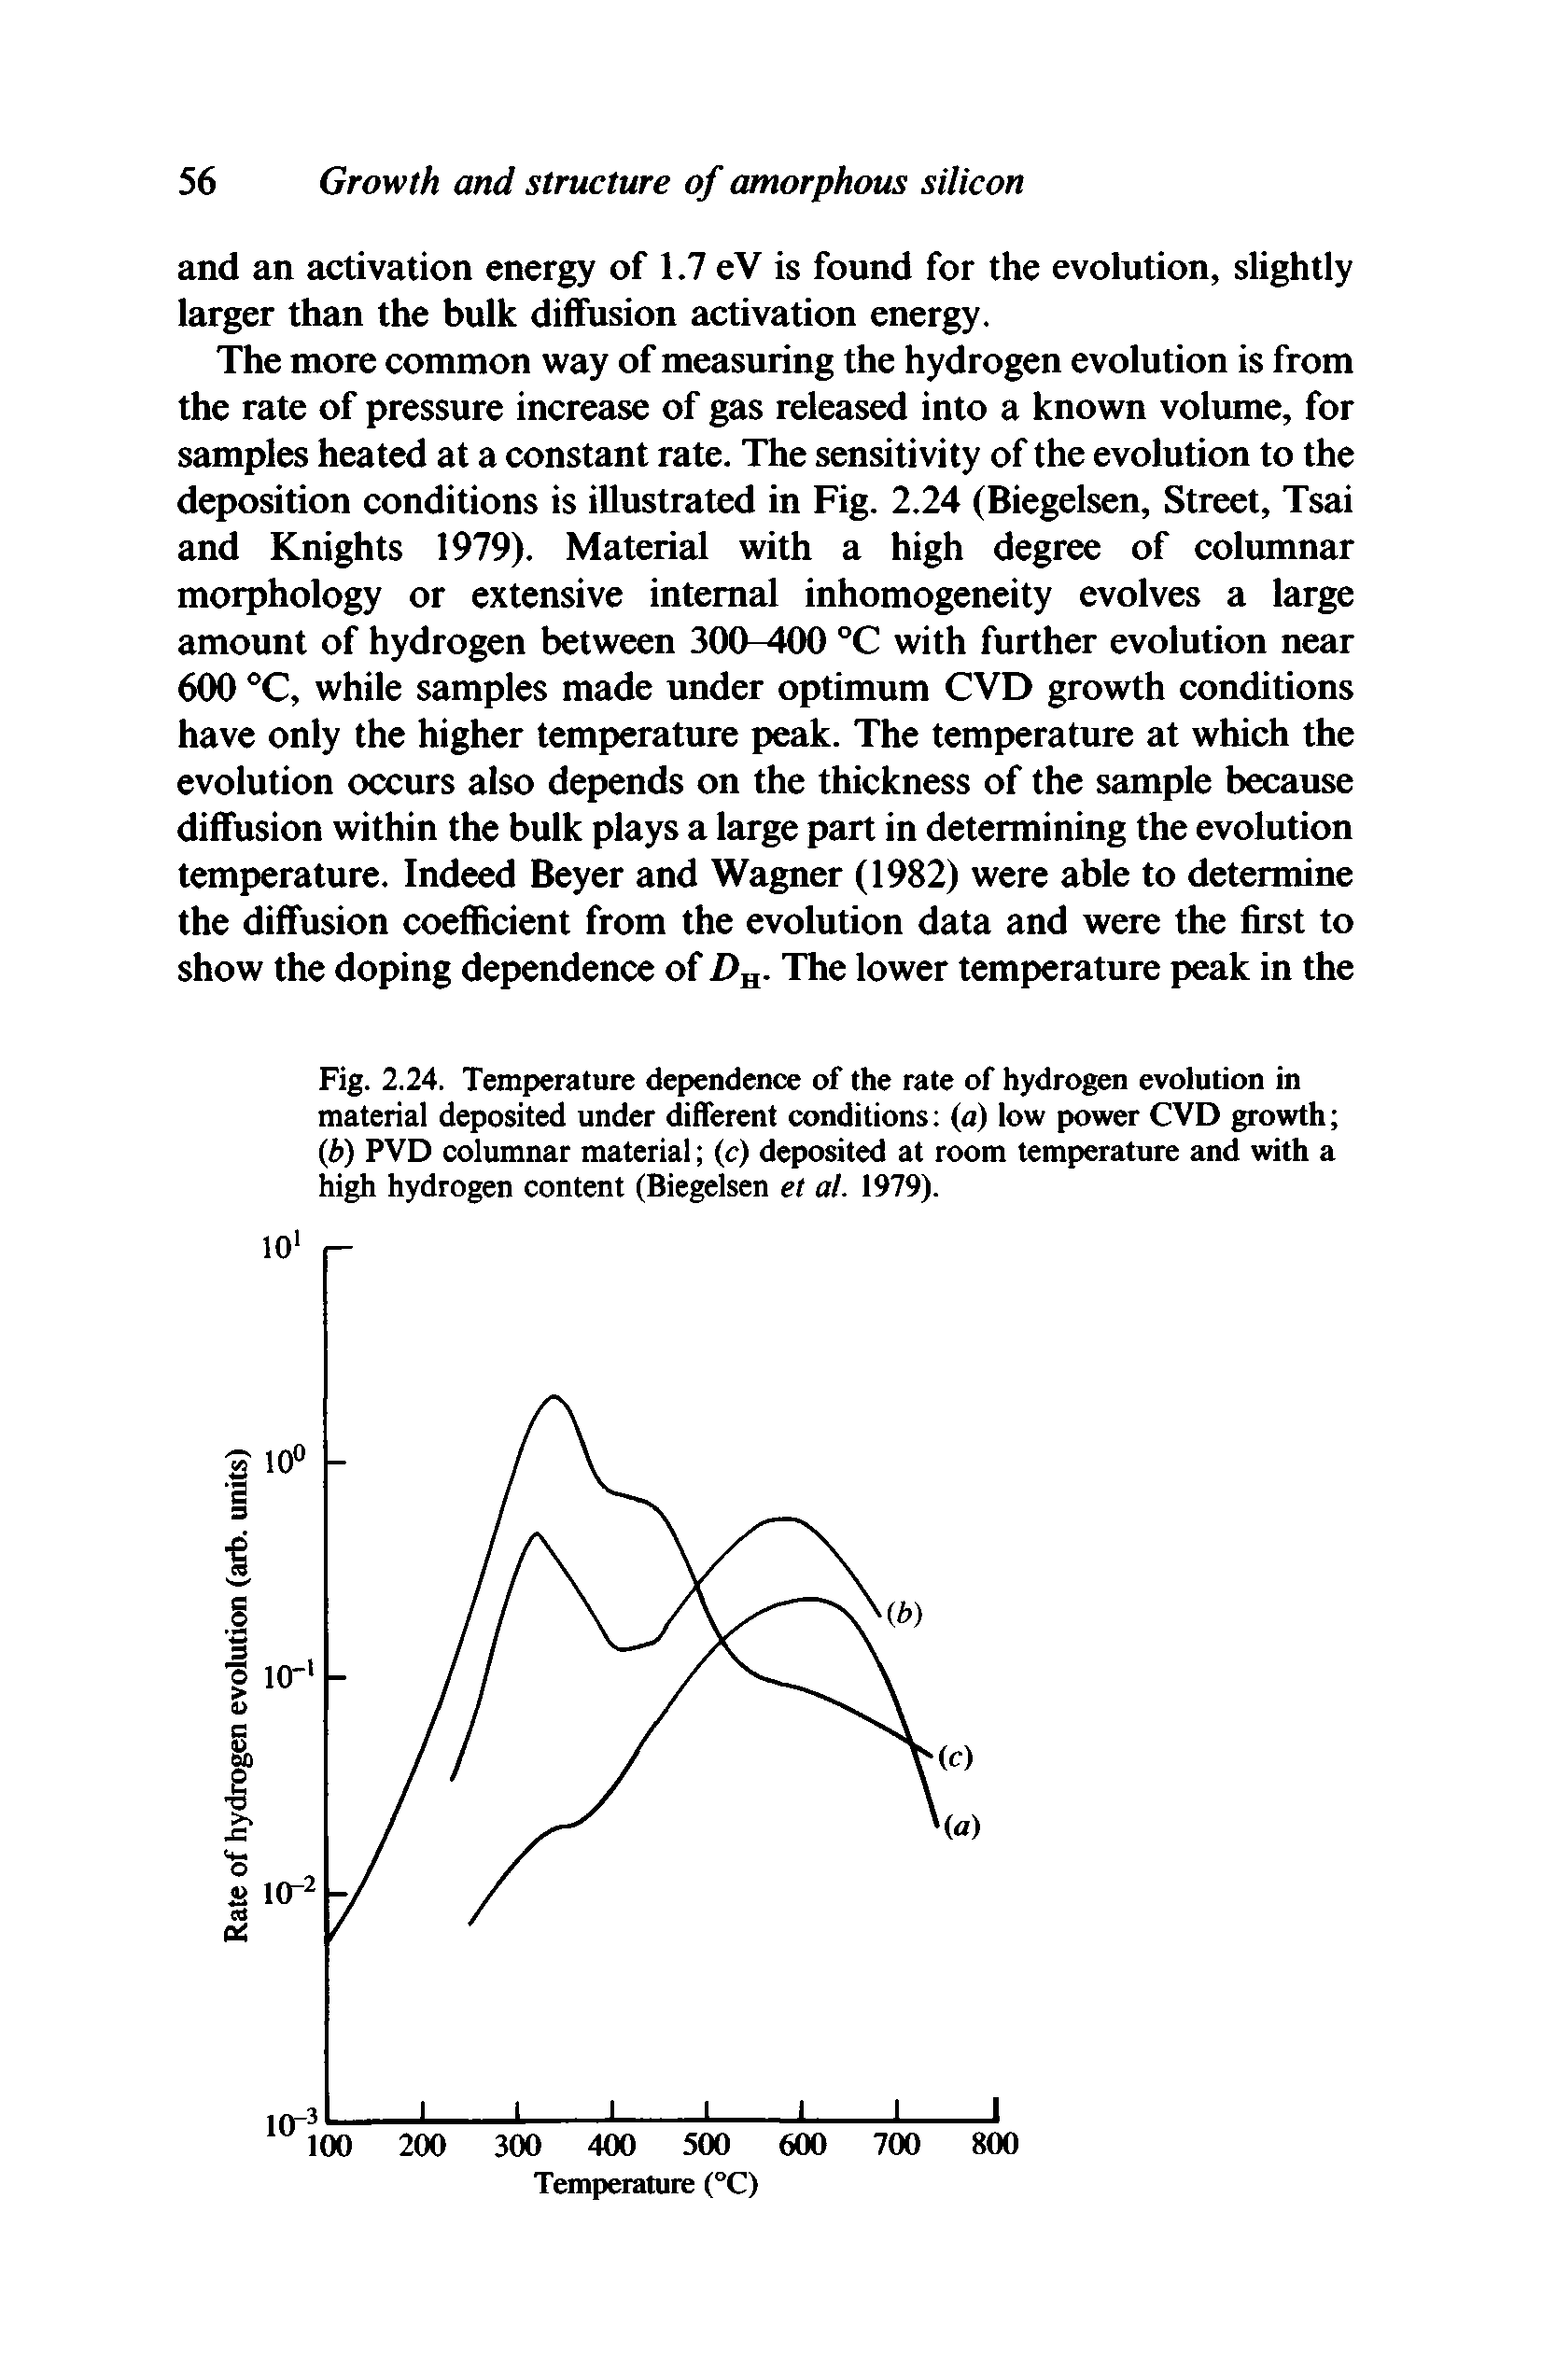 Fig. 2.24. Temperature dependence of the rate of hydrogen evolution in material deposited under different conditions (u) low power CVD growth b) PVD columnar material (c) deposited at room temperature and with a high hydrogen content (Biegelsen et at. 1979).